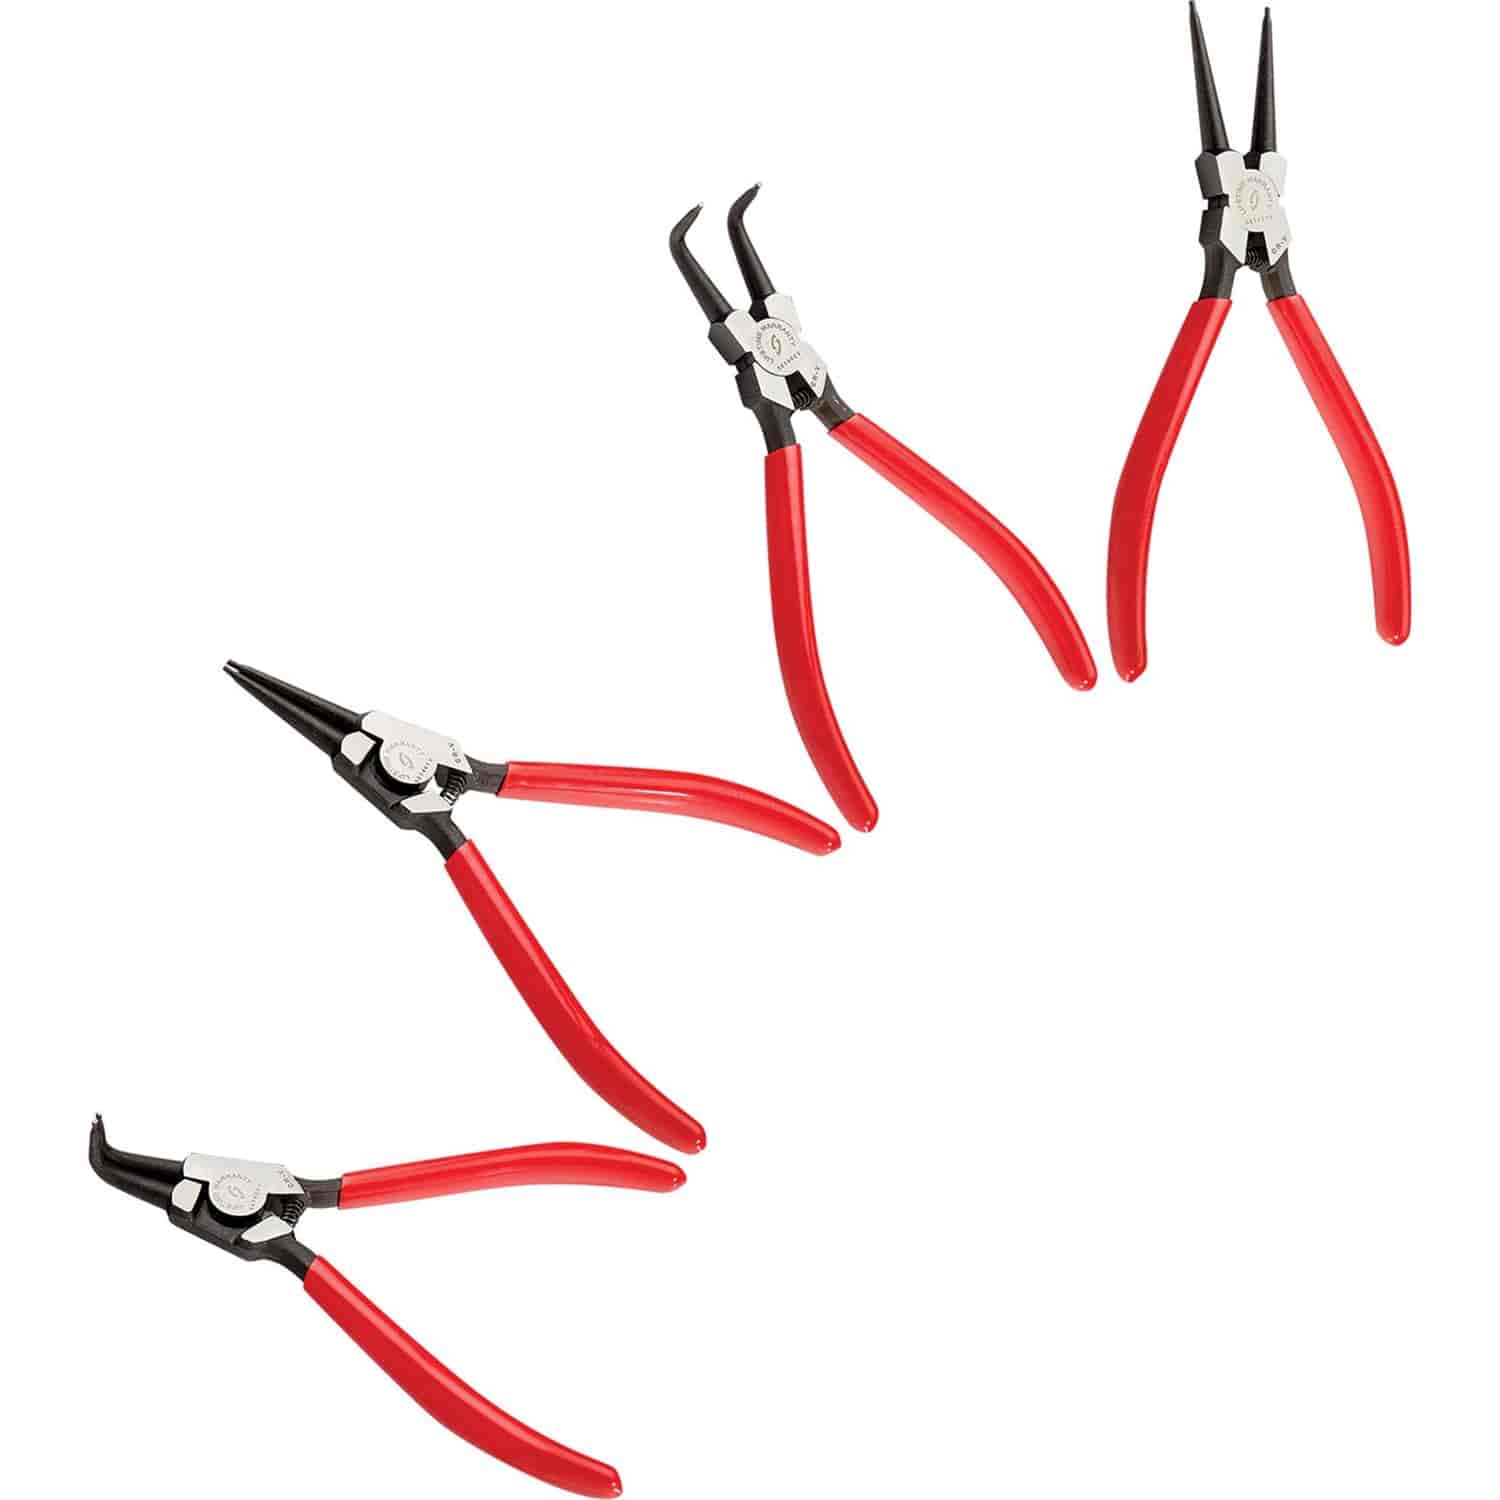 4PC SNAP RING PLIERS SET